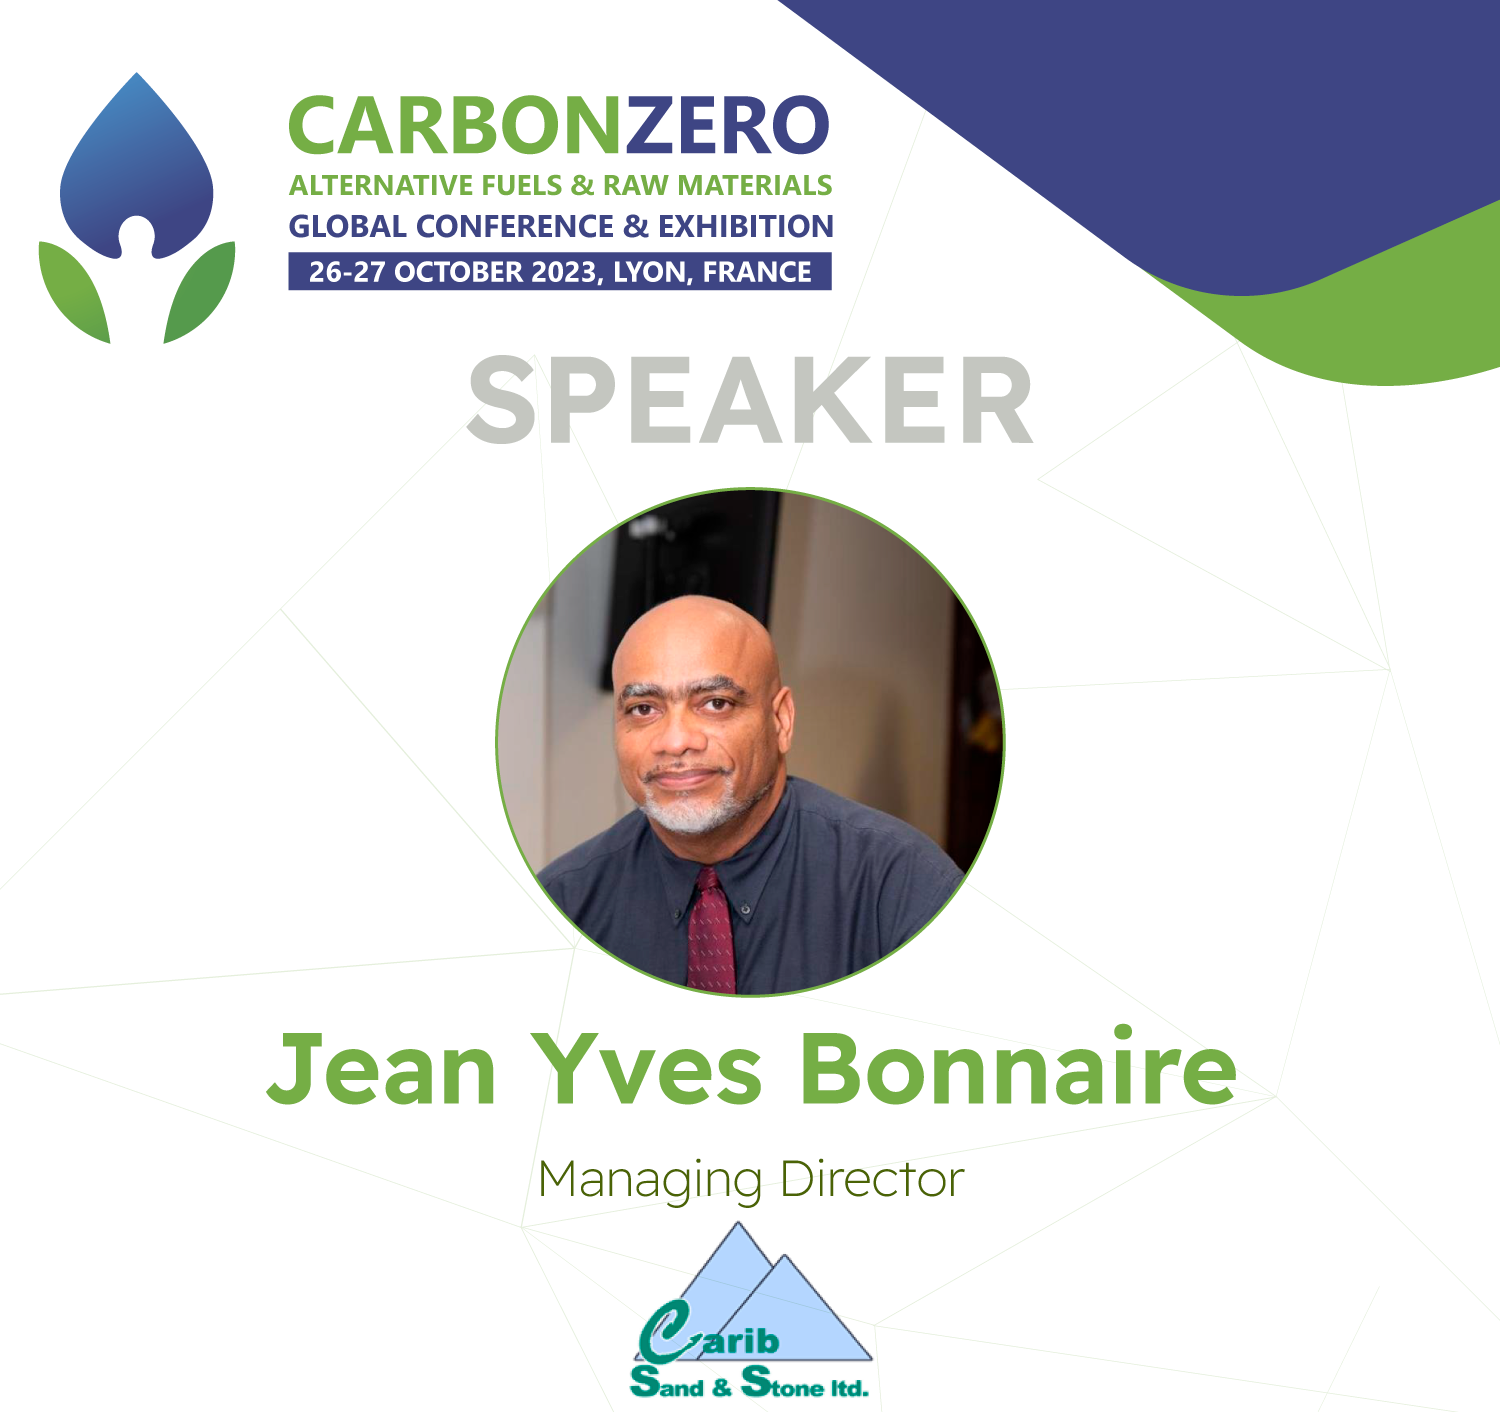 CarbonZero: Alternative Fuels and Raw Materials Global Conference and Exhibition, has added Jean Yves Bonnaire, MD of Carib Sand & Stone Ltd, to its line-up of speakers.